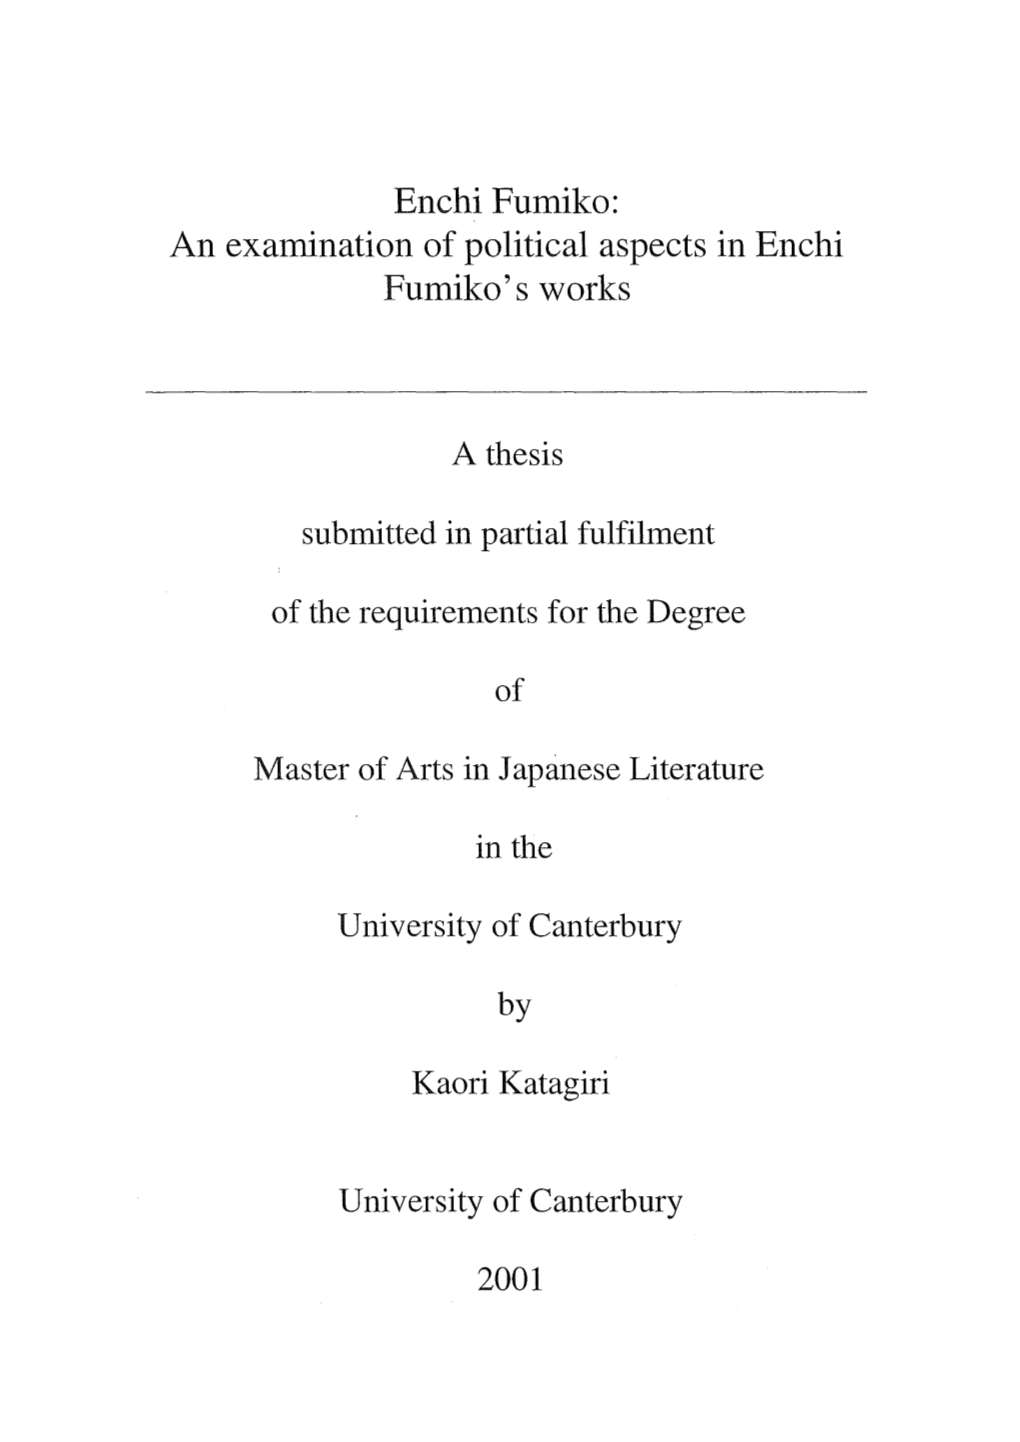 Enchi Fumiko: an Examination of Political Aspects in En Chi Fumiko's Works